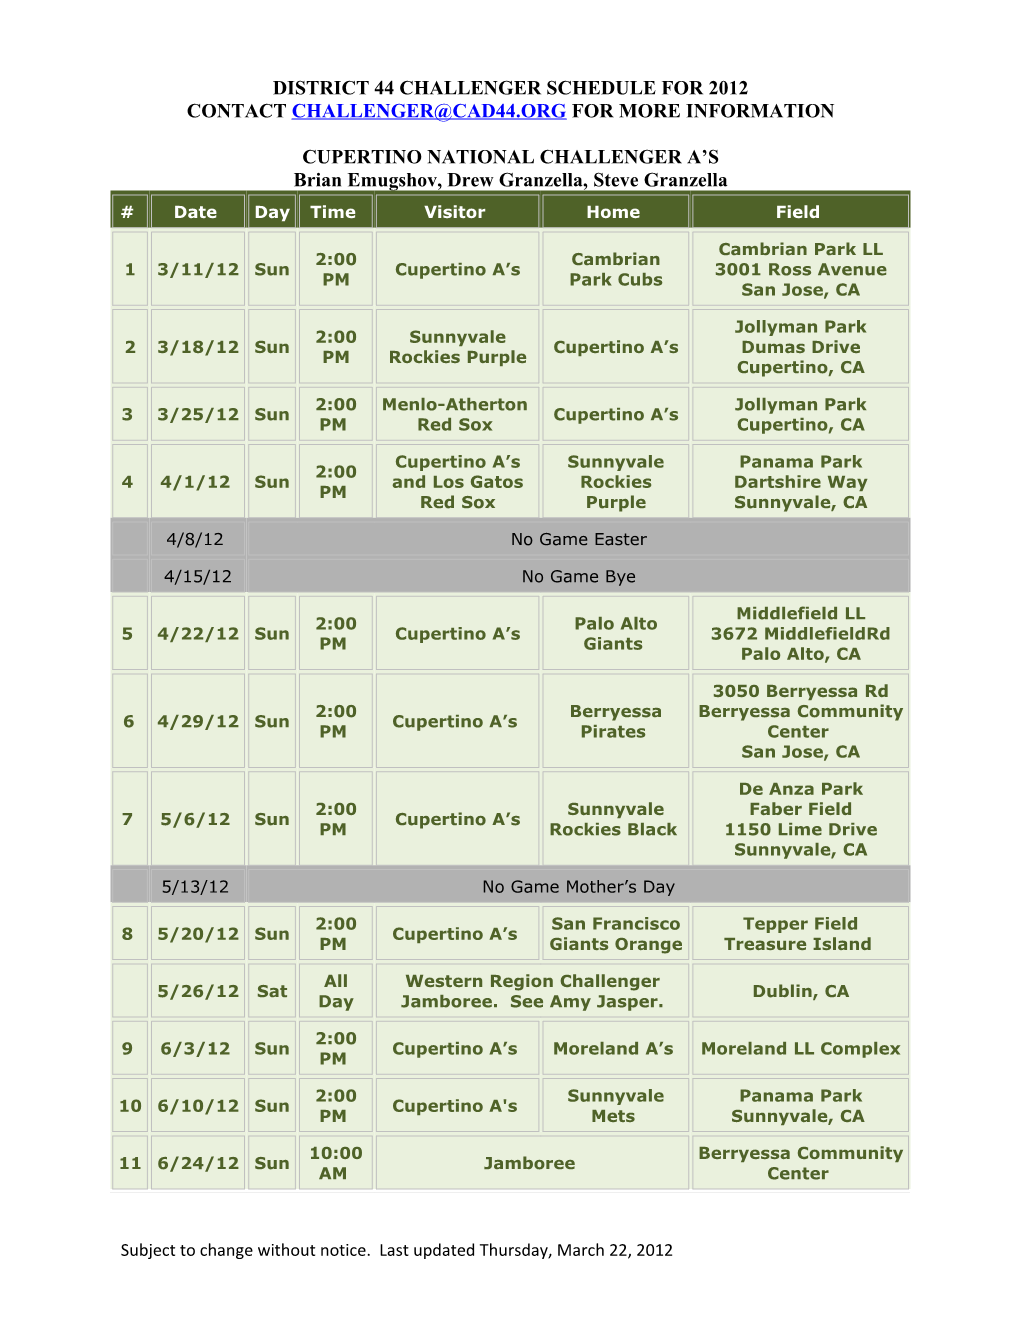 District 44 Challenger Schedule for 2012